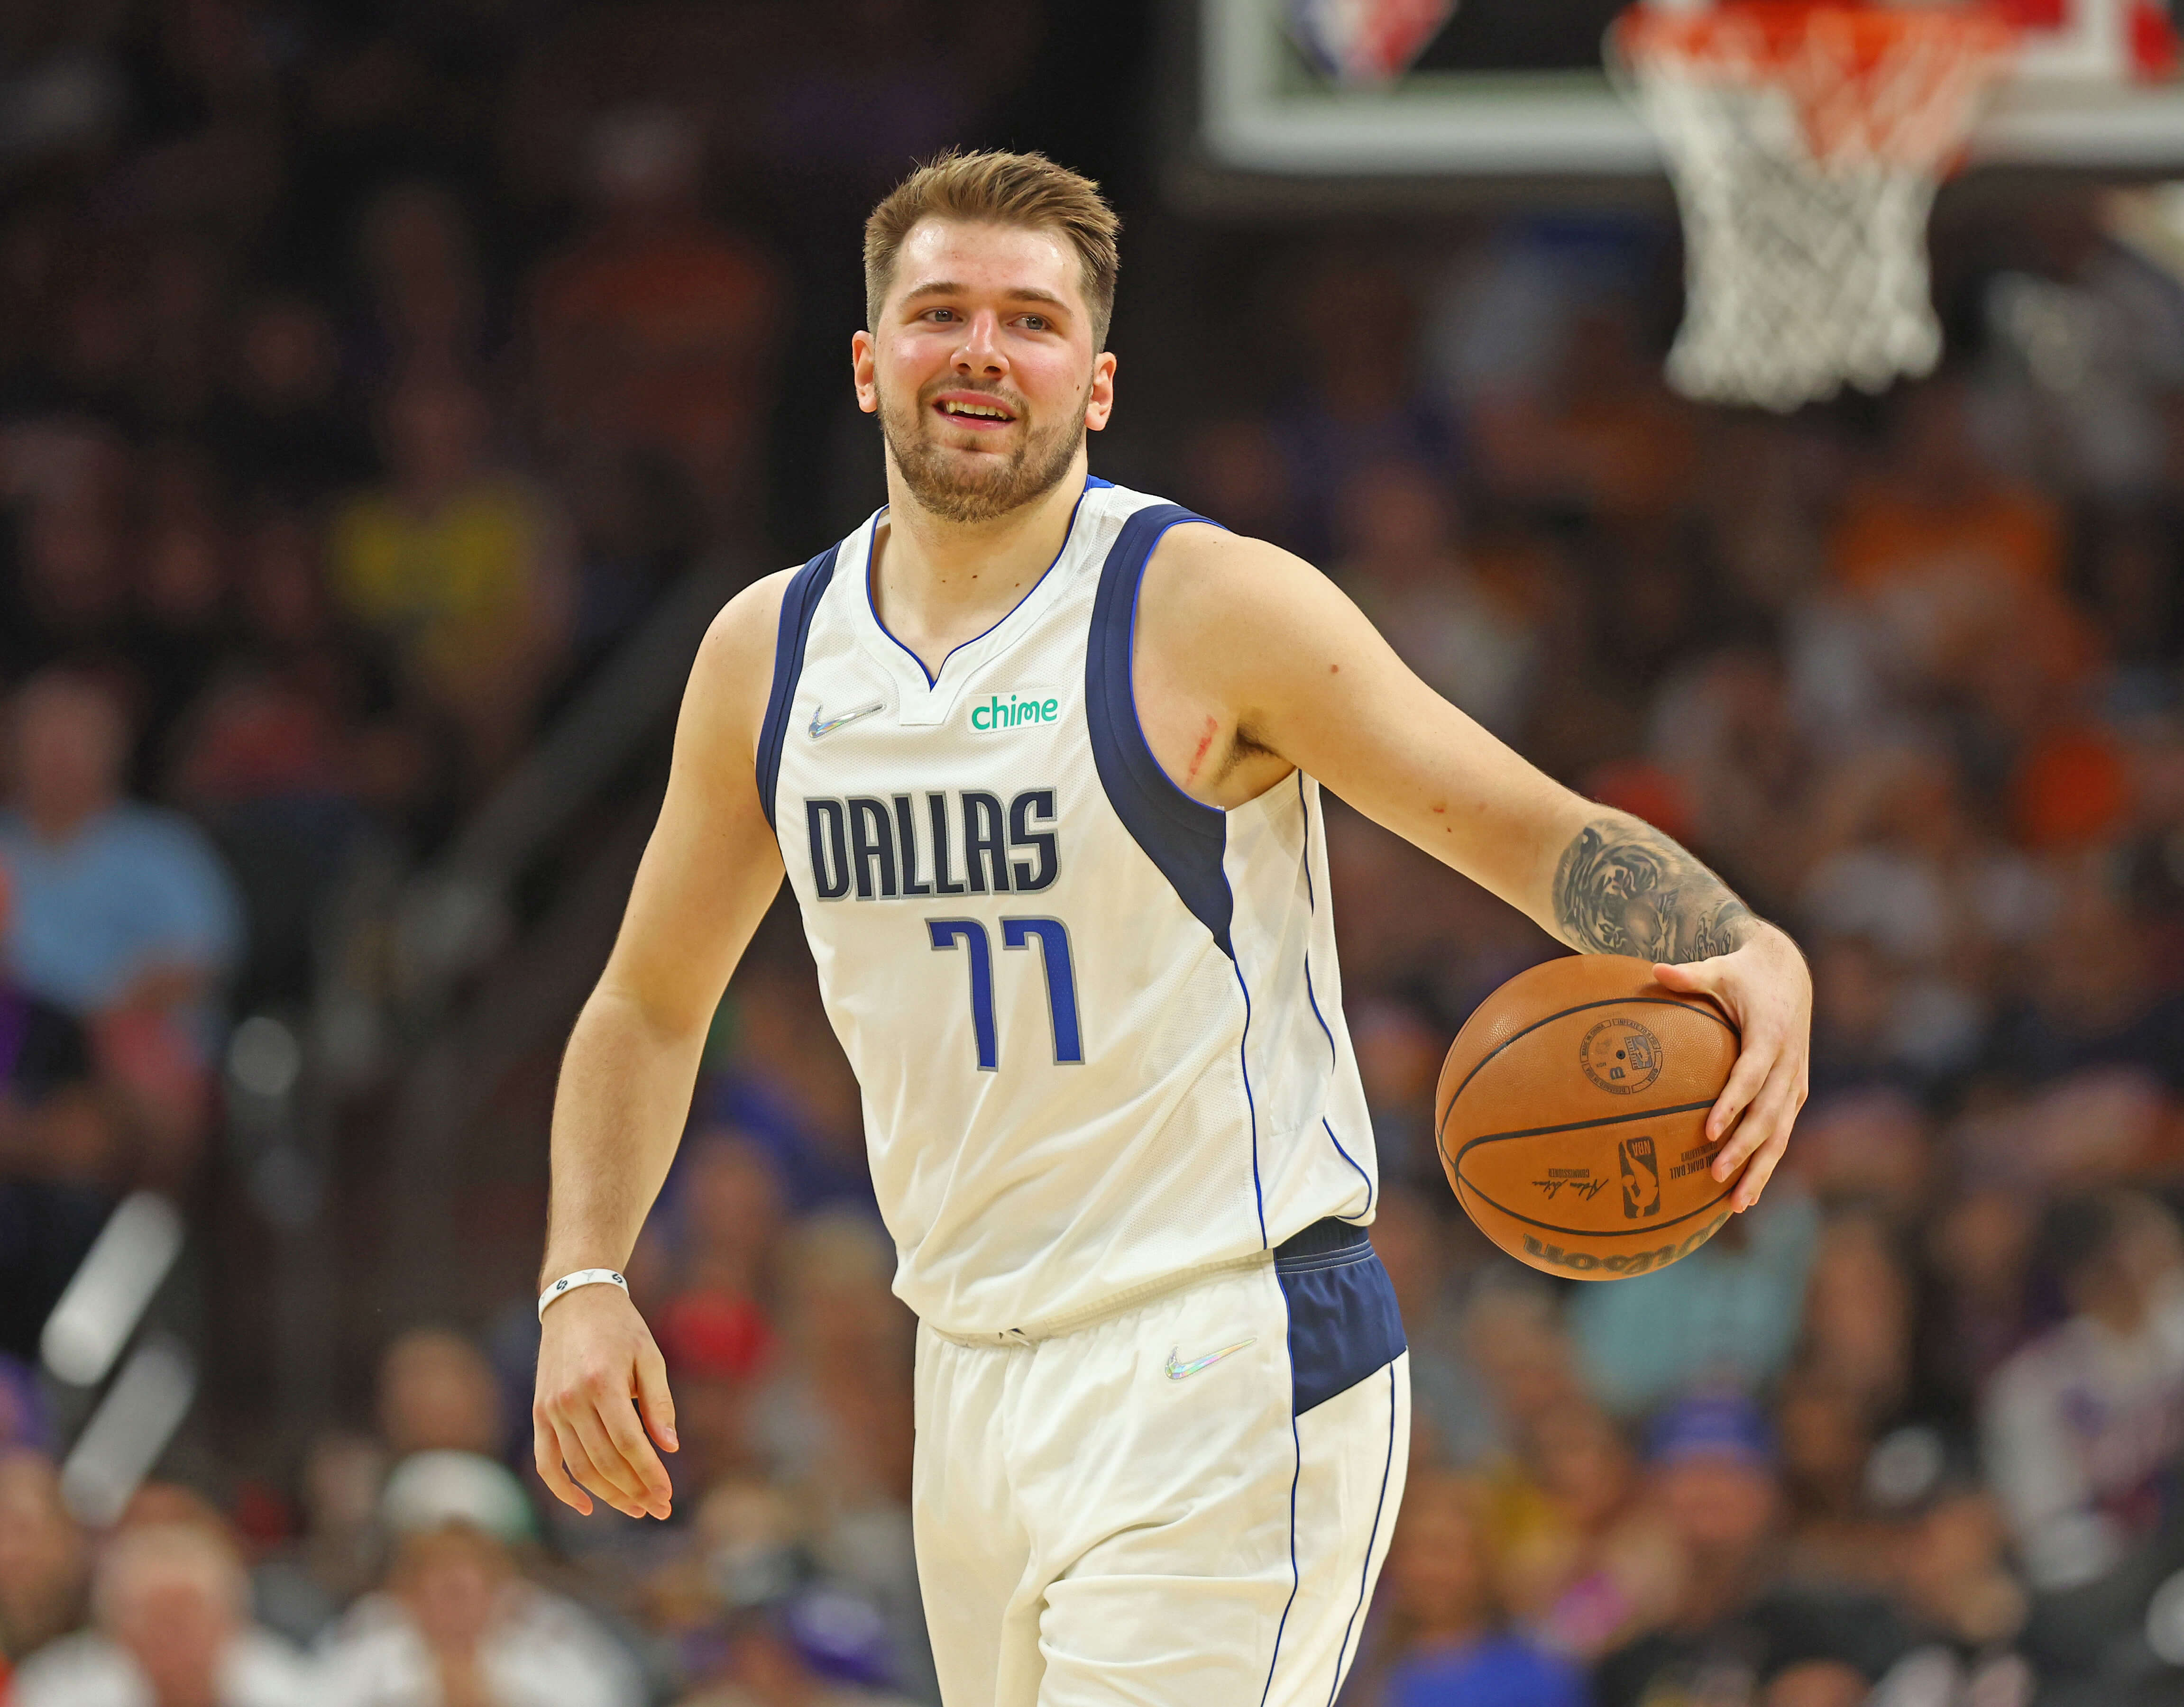 How To Bet - Mavericks vs Warriors Game 1 Picks and Predictions: Dallas Should Cover as Road Dog